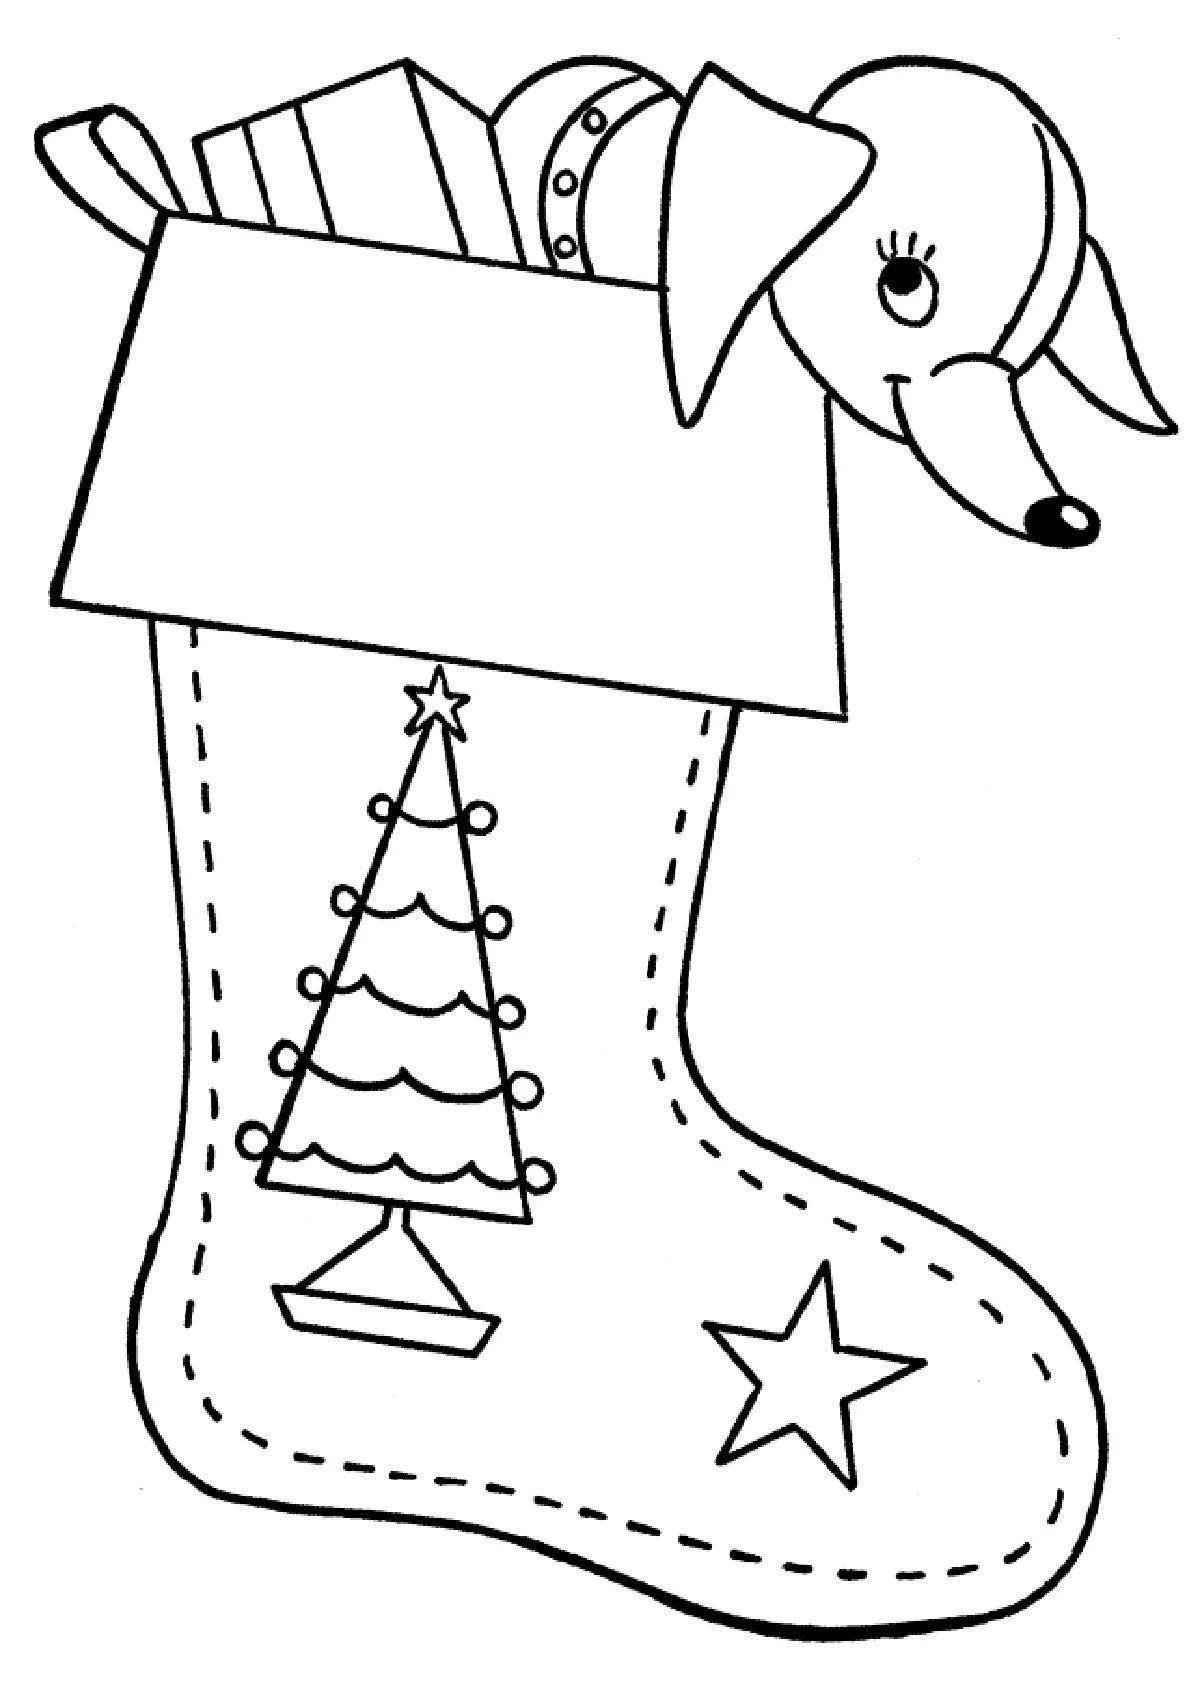 Bright Christmas boots coloring page